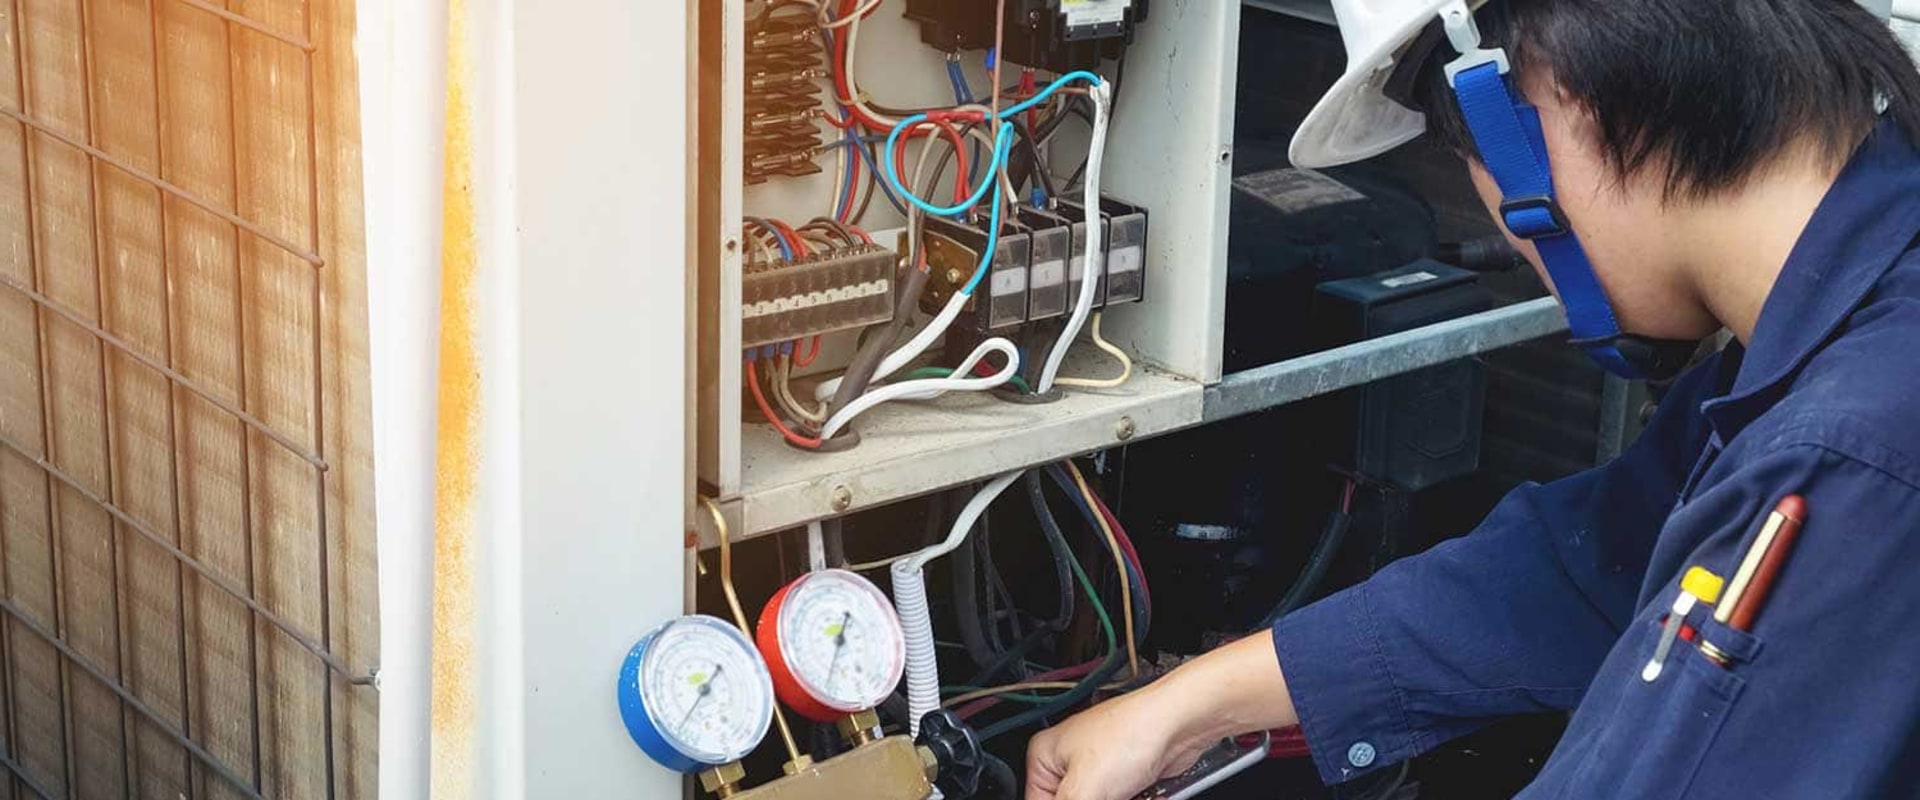 How to Tell if Your AC is Running Efficiently After a Tune-Up